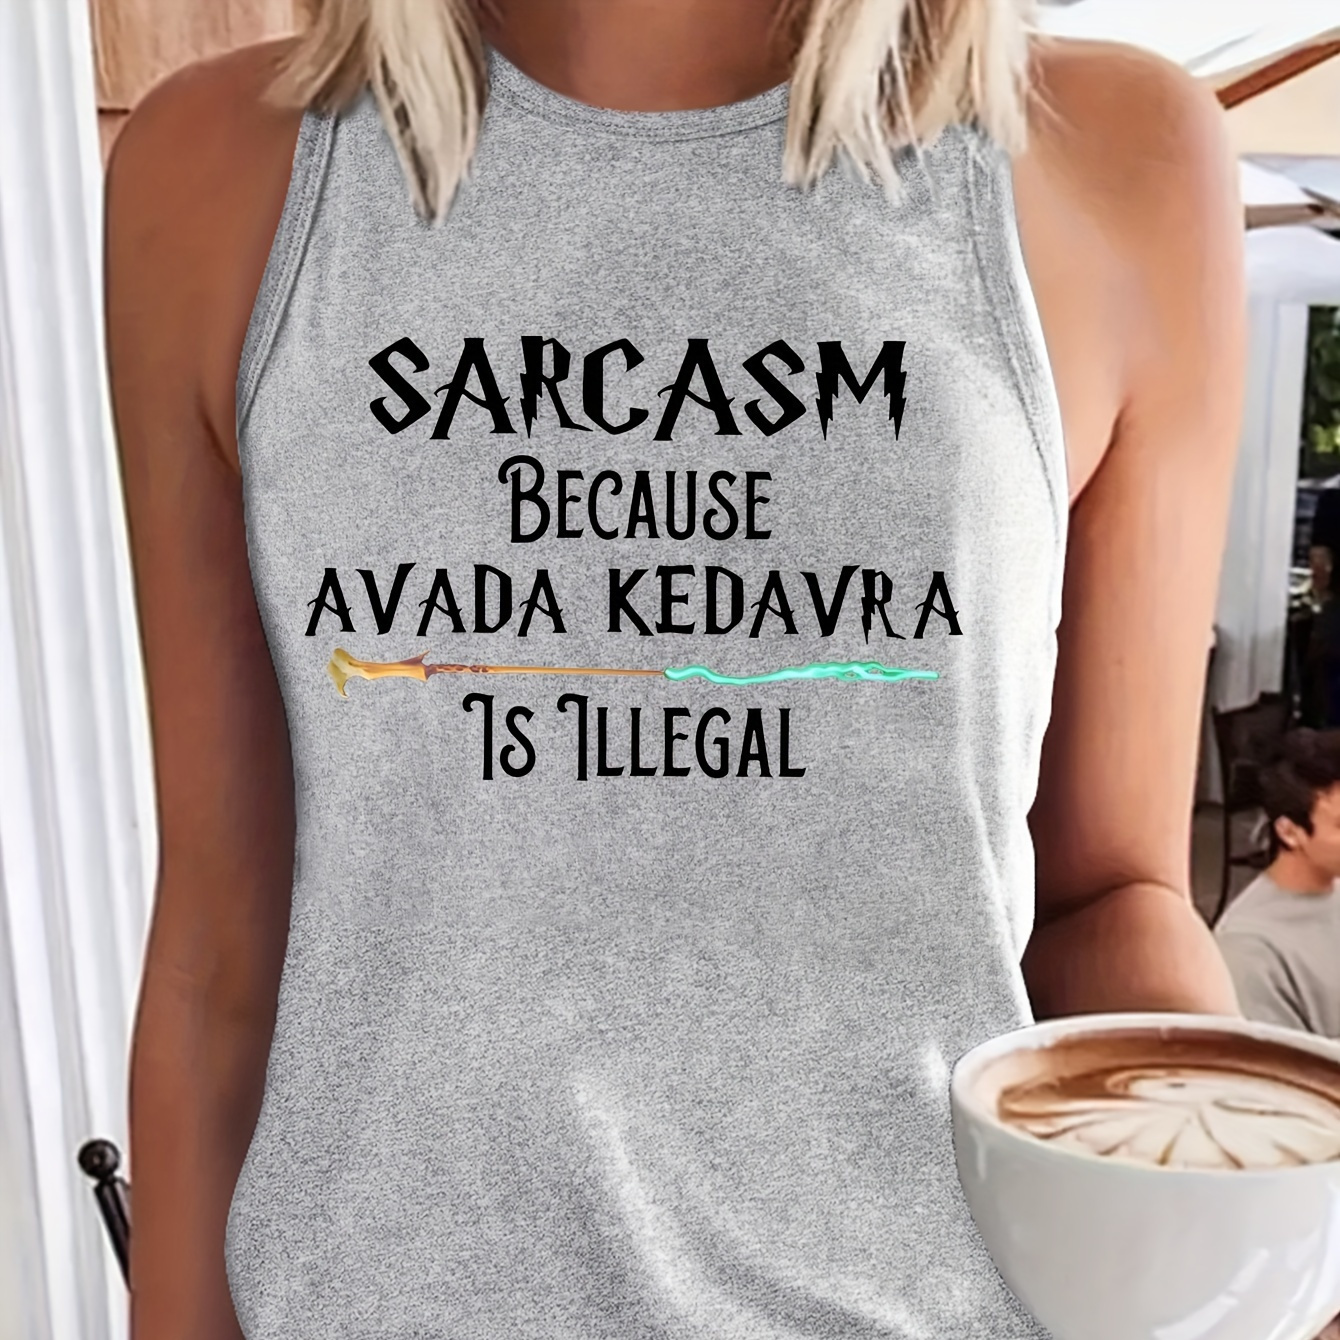 

Sarcasm Print Crew Neck Tank Top, Casual Sleeveless Top For Summer, Women's Clothing